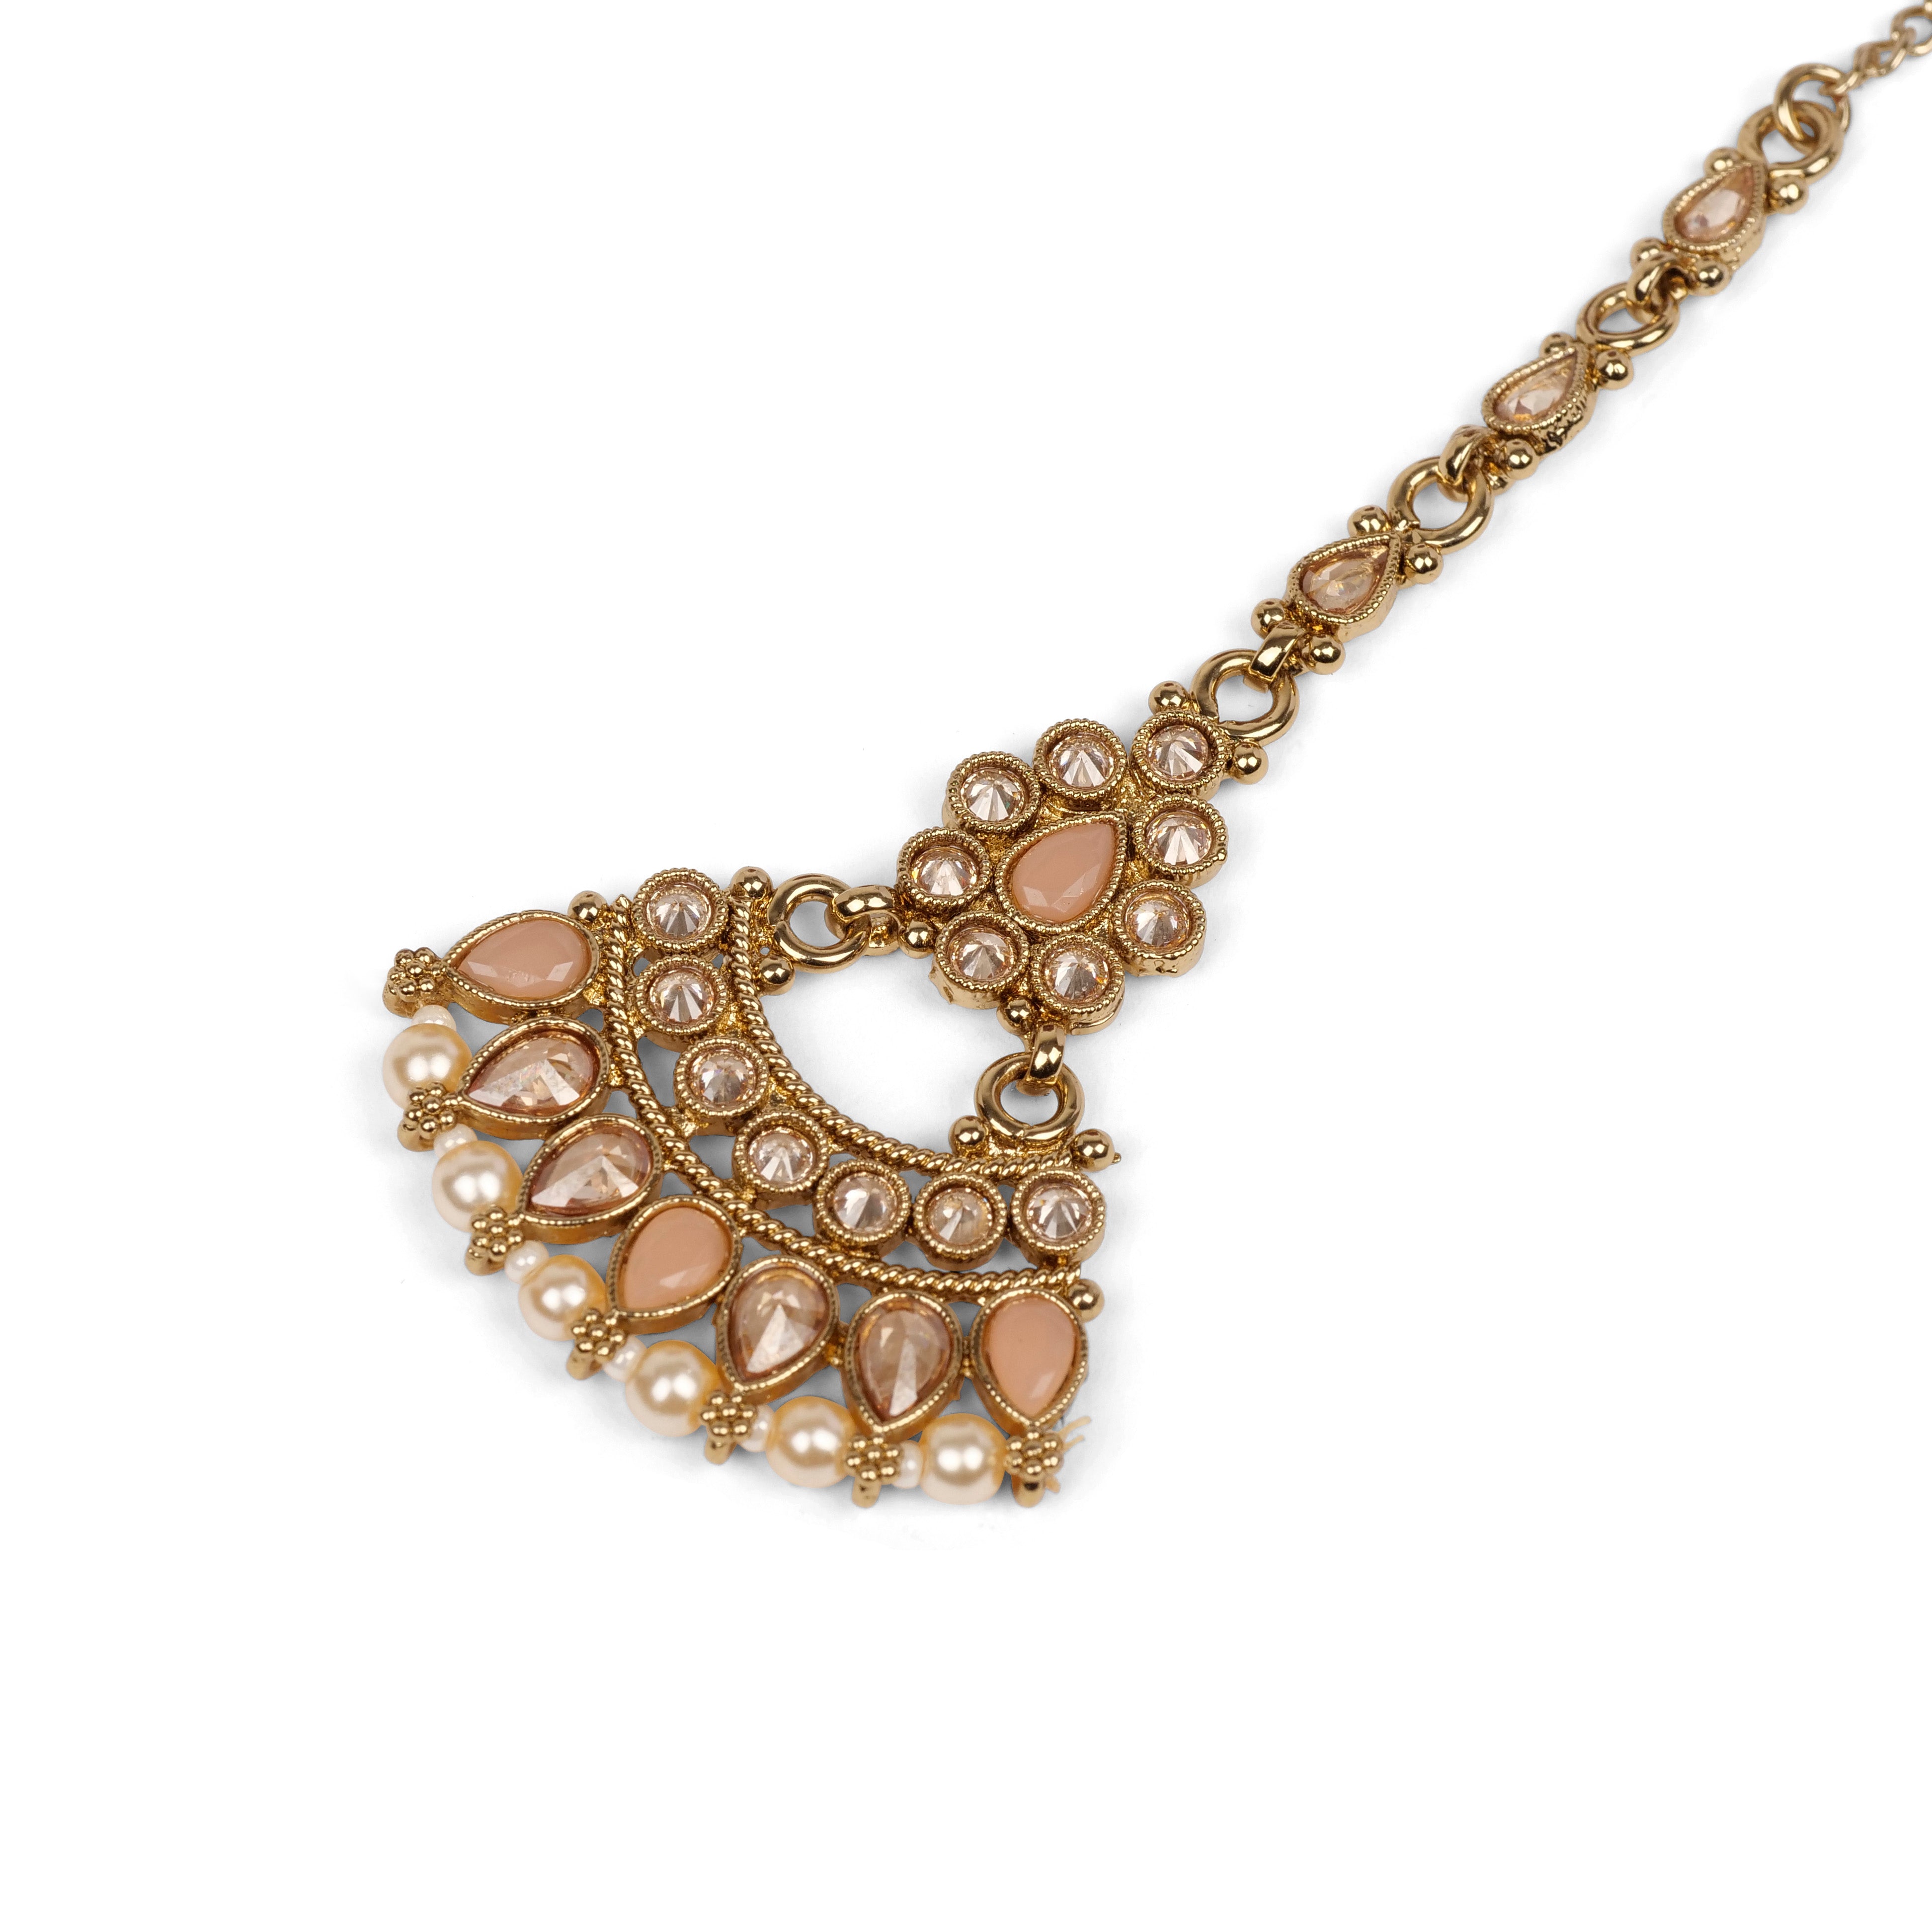 Anala Simple Neckalace Set in Peach and Pearl